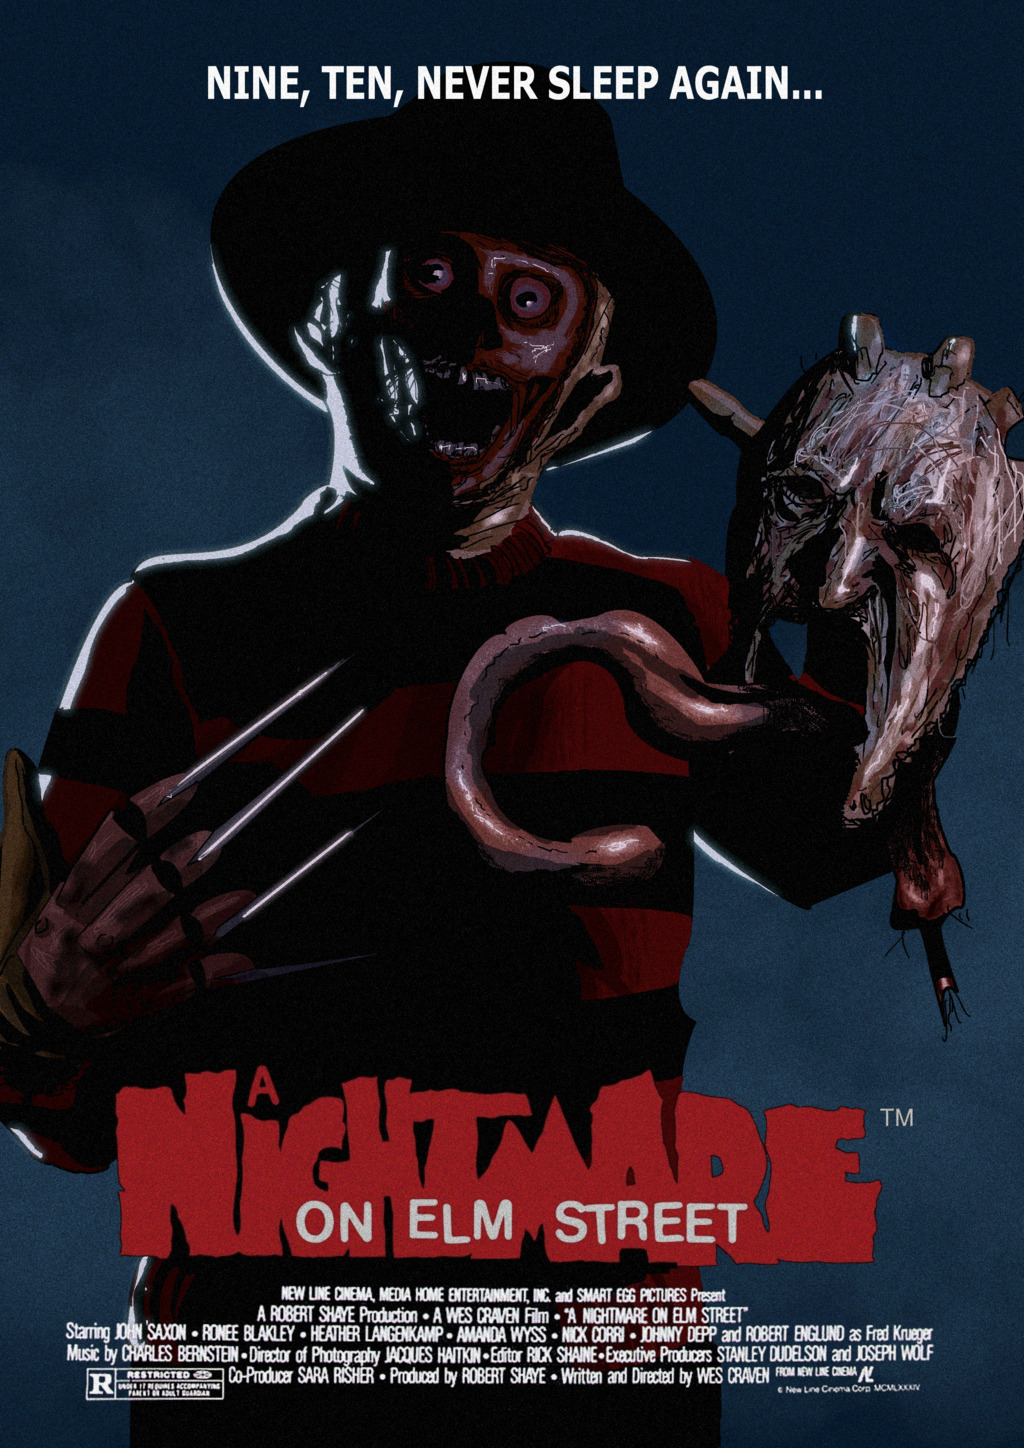 NIGHTMARE ON ELM STREET FREDDY KRUEGER MOVIE POSTER PICTURE PRINT Sizes A5 to A0